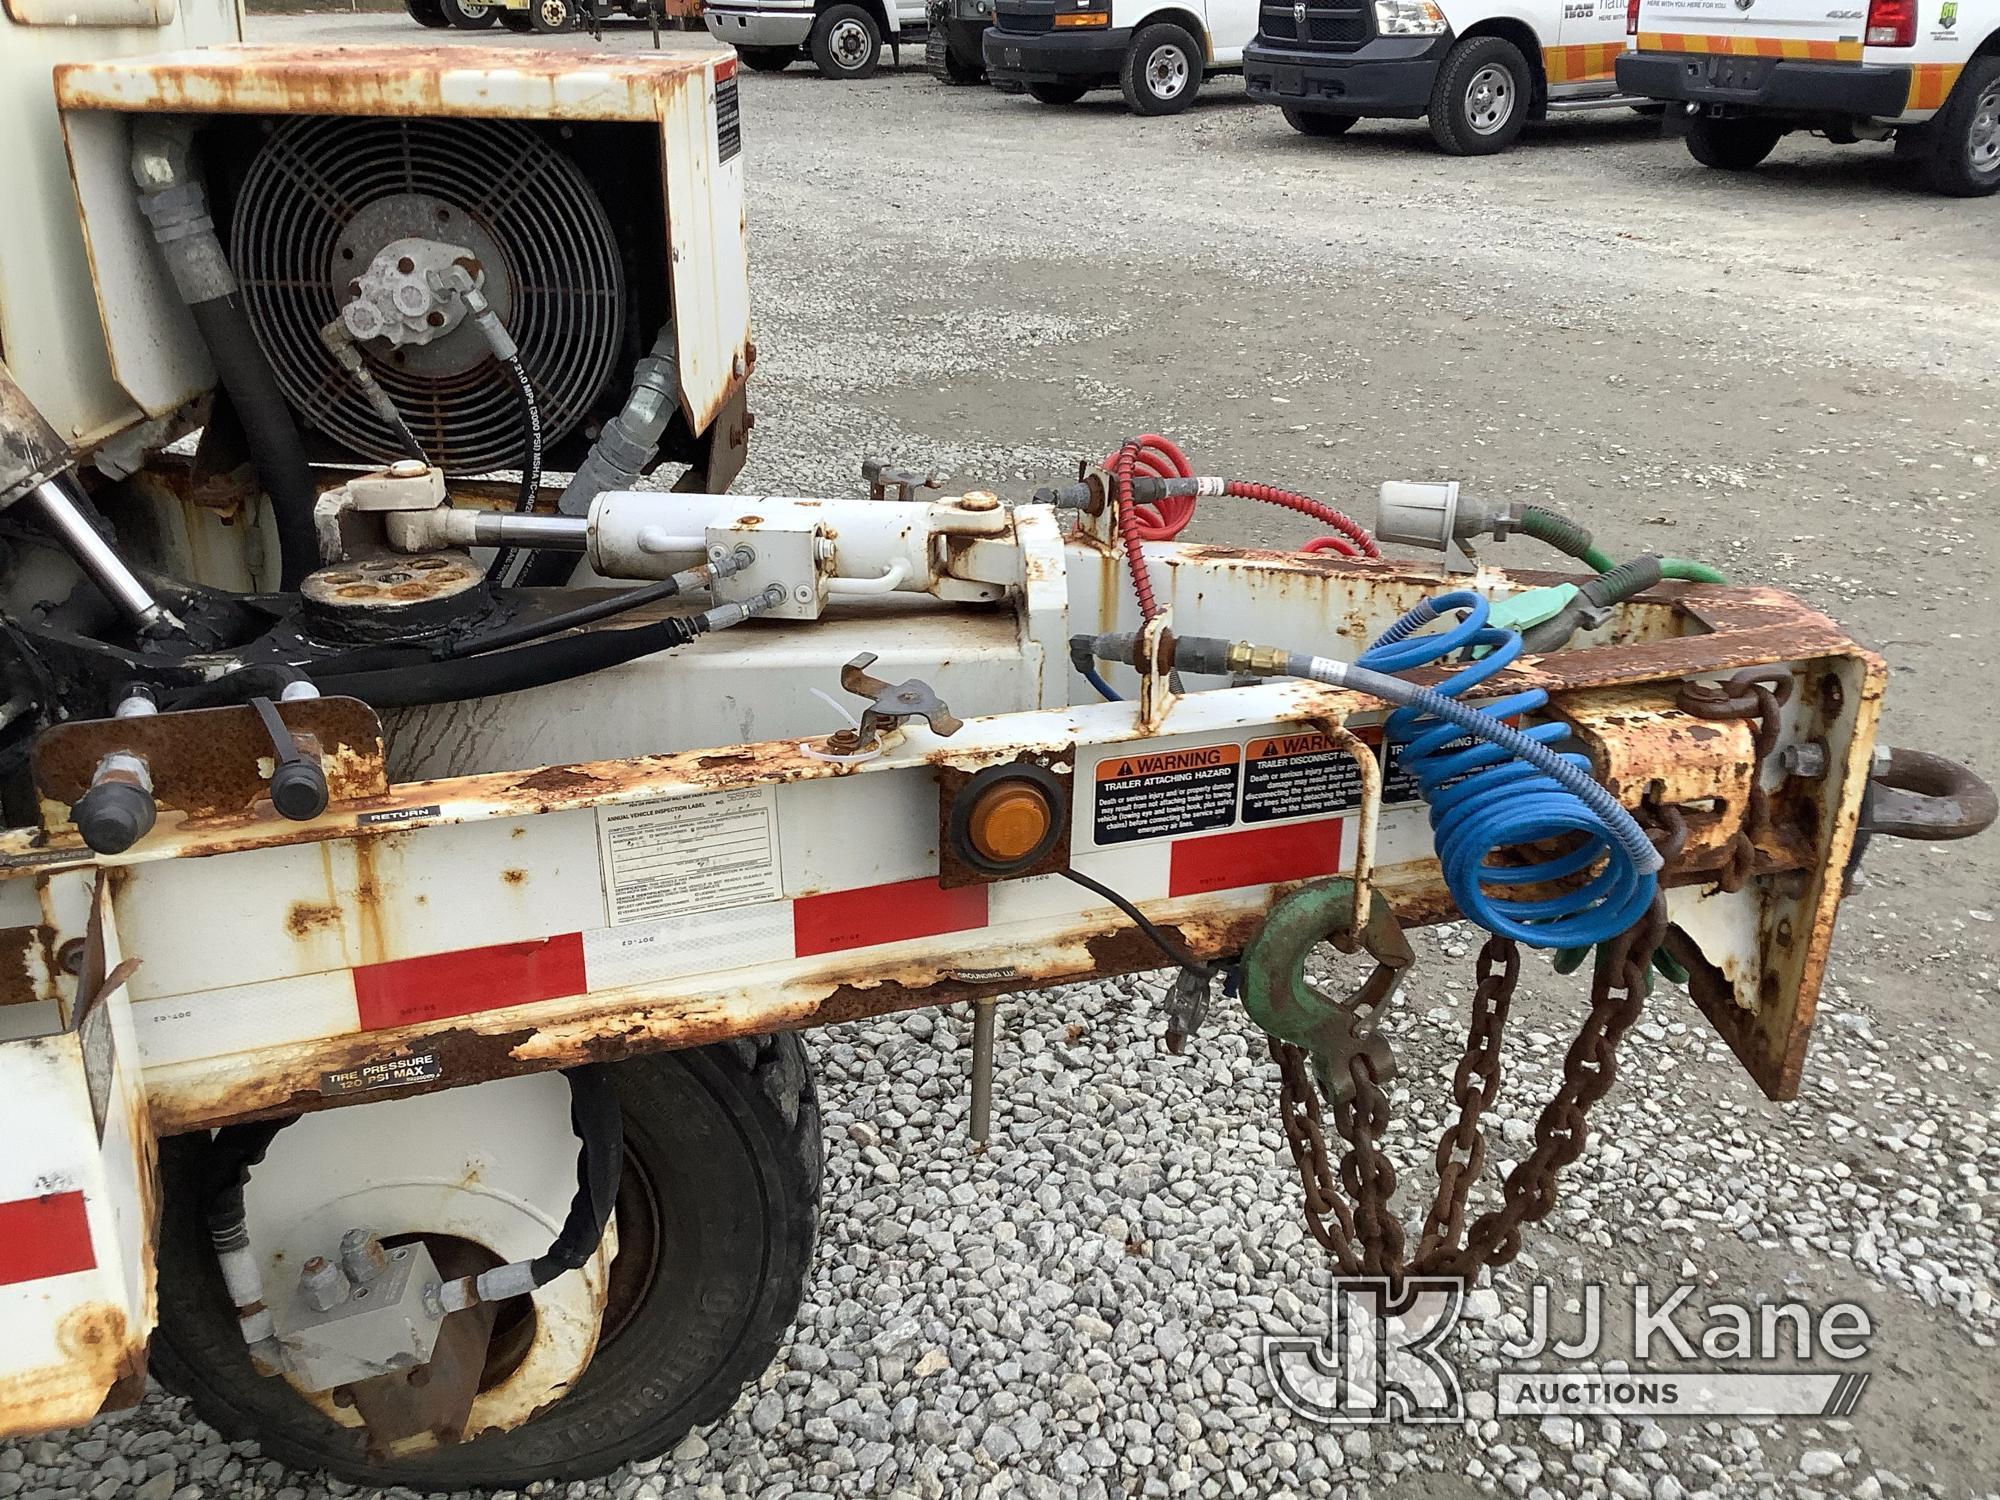 (Shrewsbury, MA) 2012 Altec AD108 Self-Propelled Underground Cable Puller Runs, Moves & Operates) (R